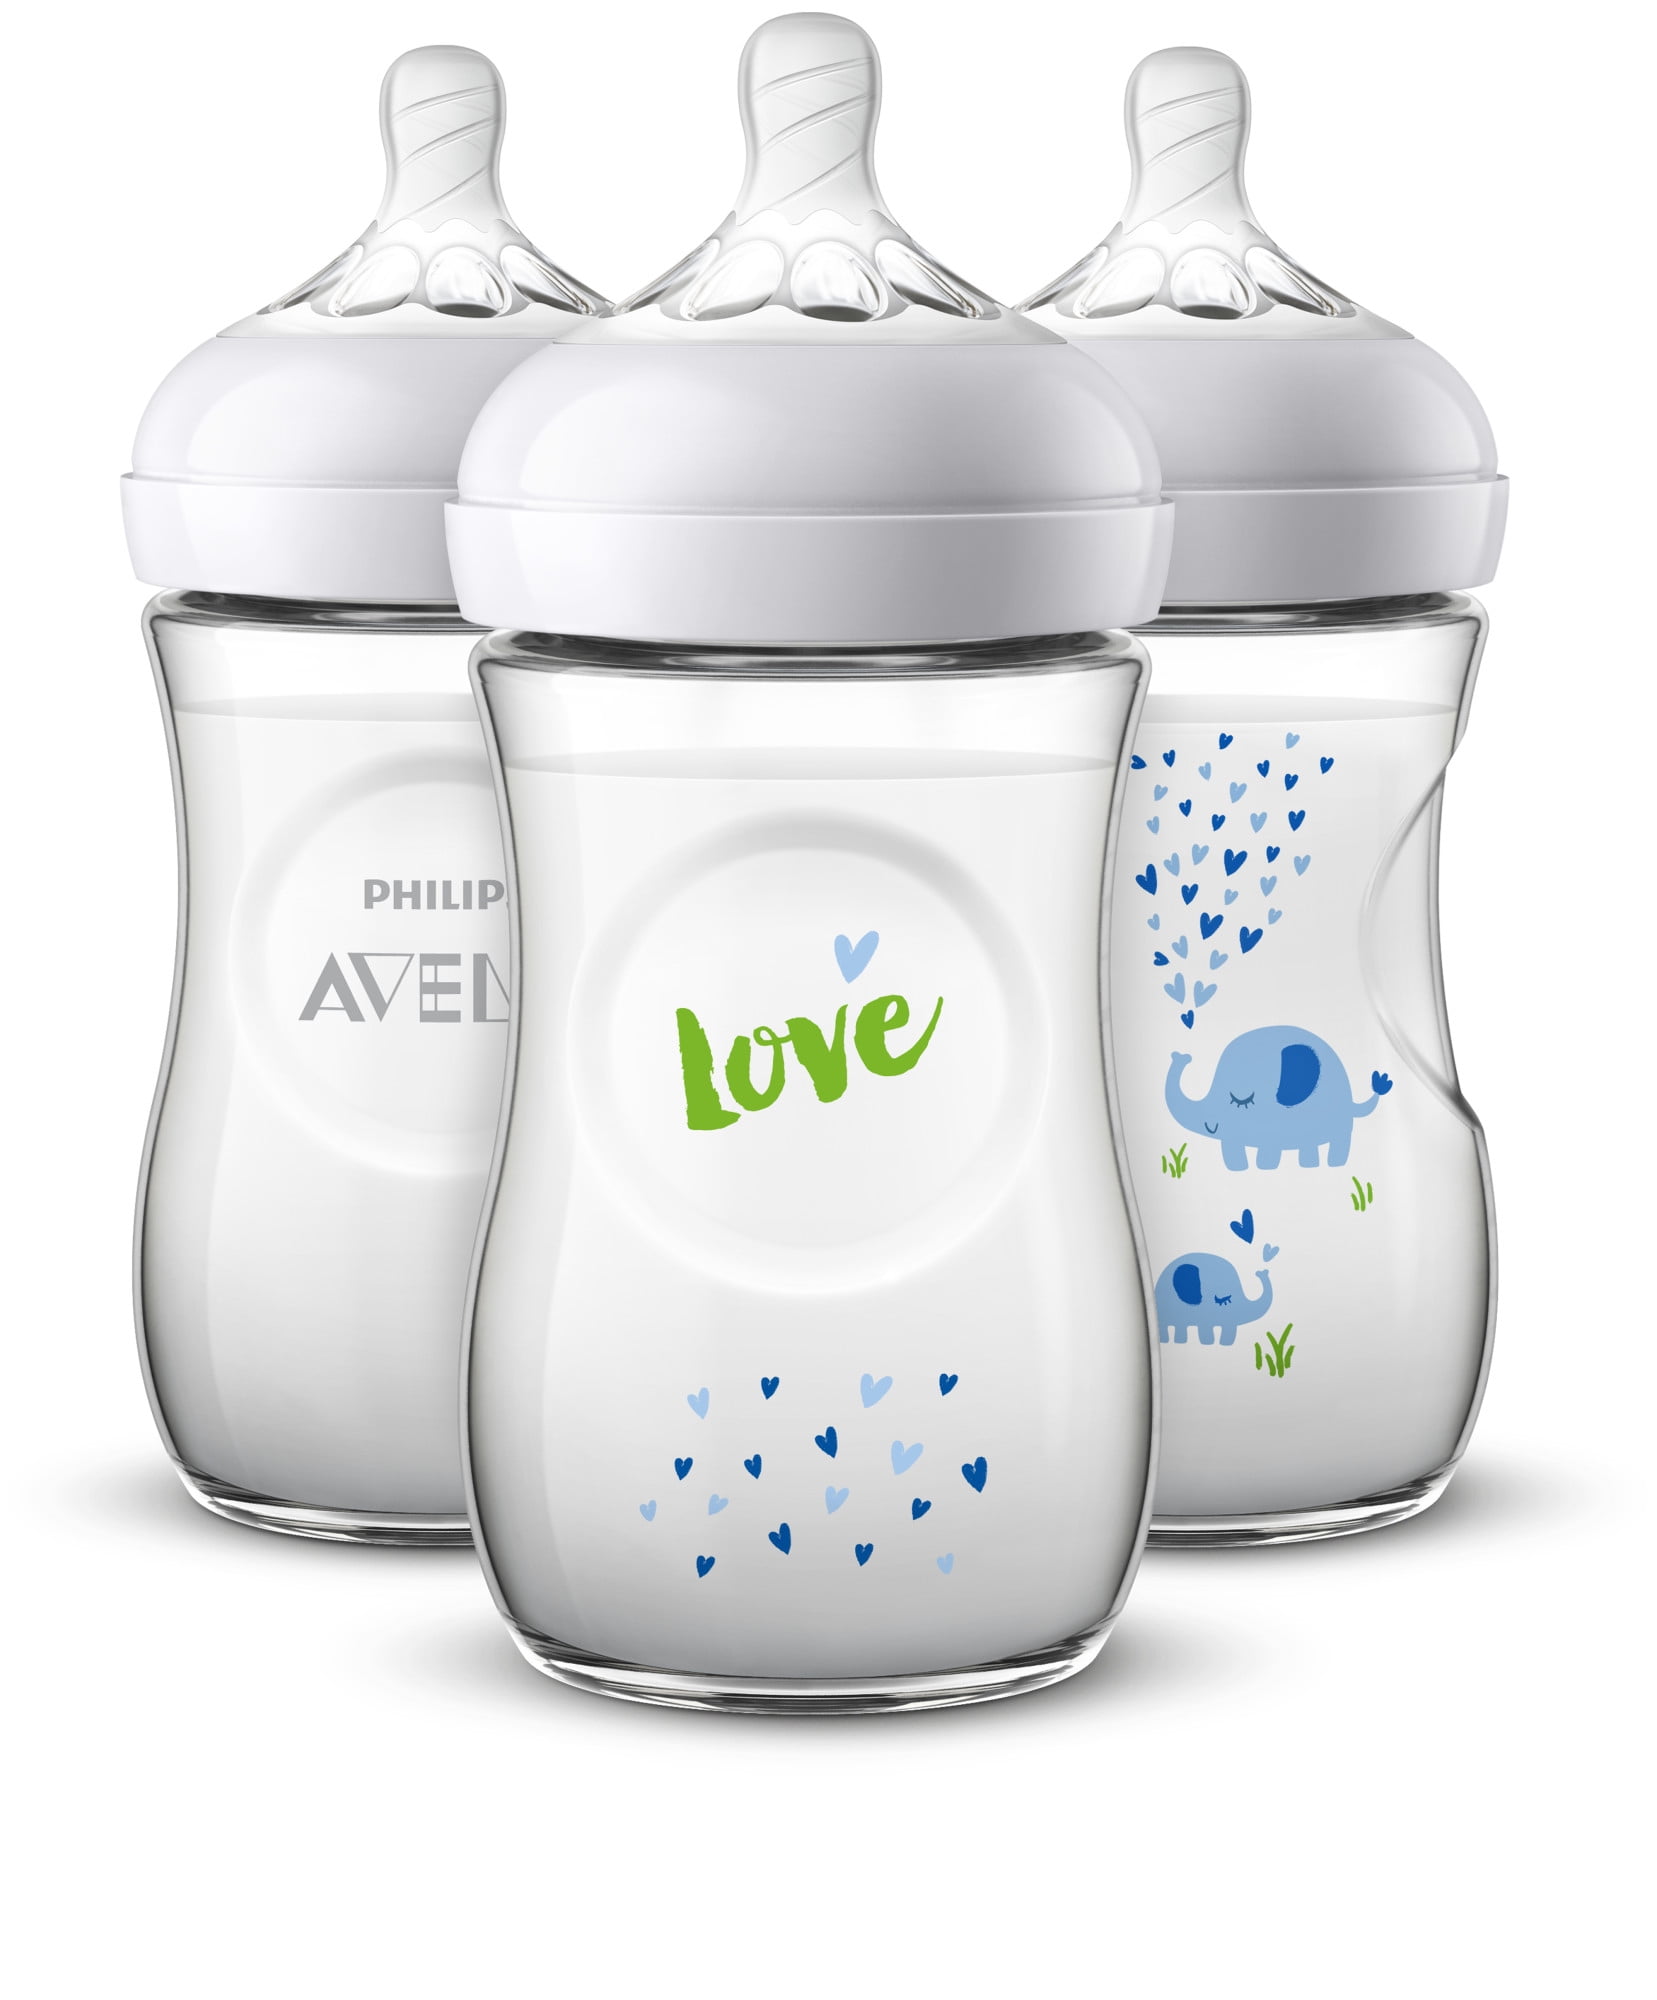 Baby Bottle Reviews on weeSpring